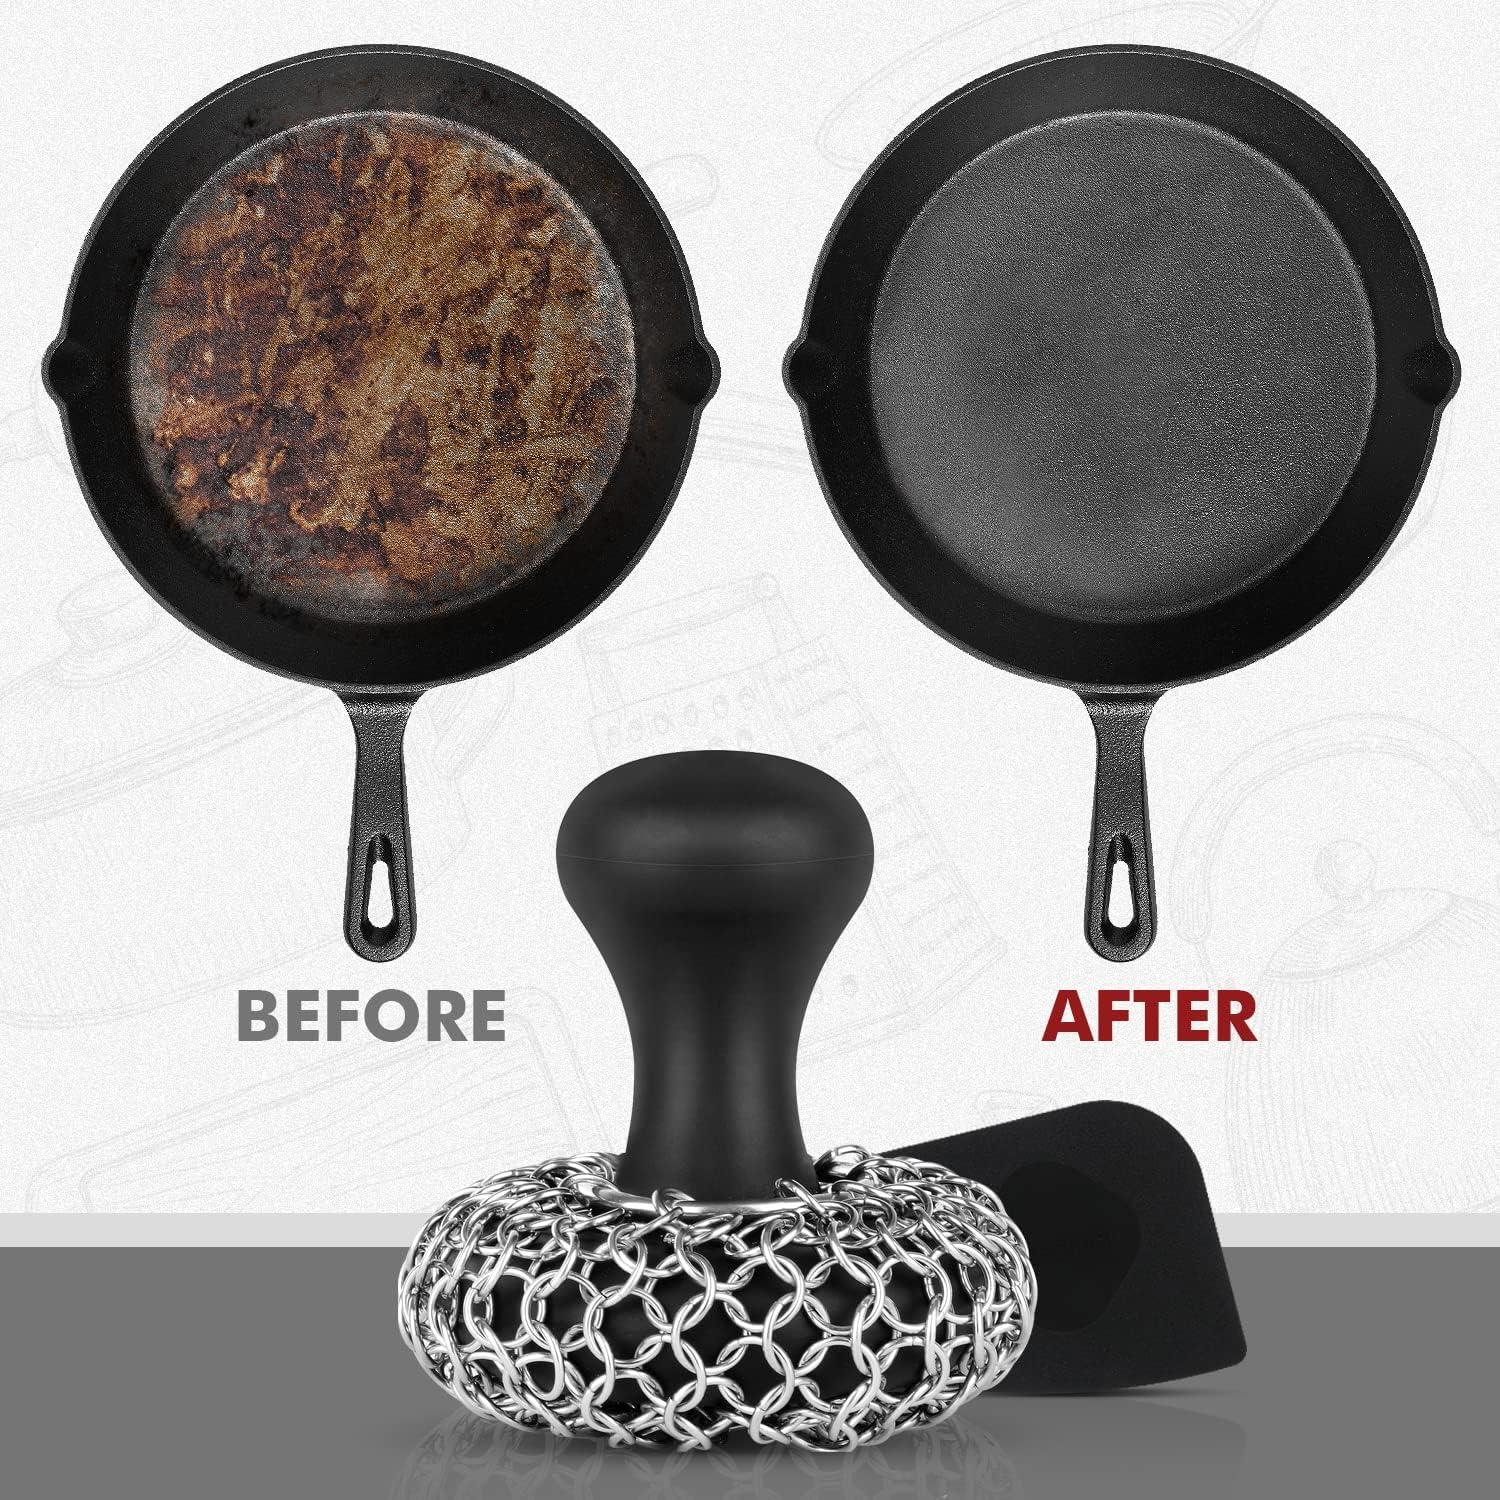 Cast Iron Chainmail Scrubber + Pan Scraper - Large